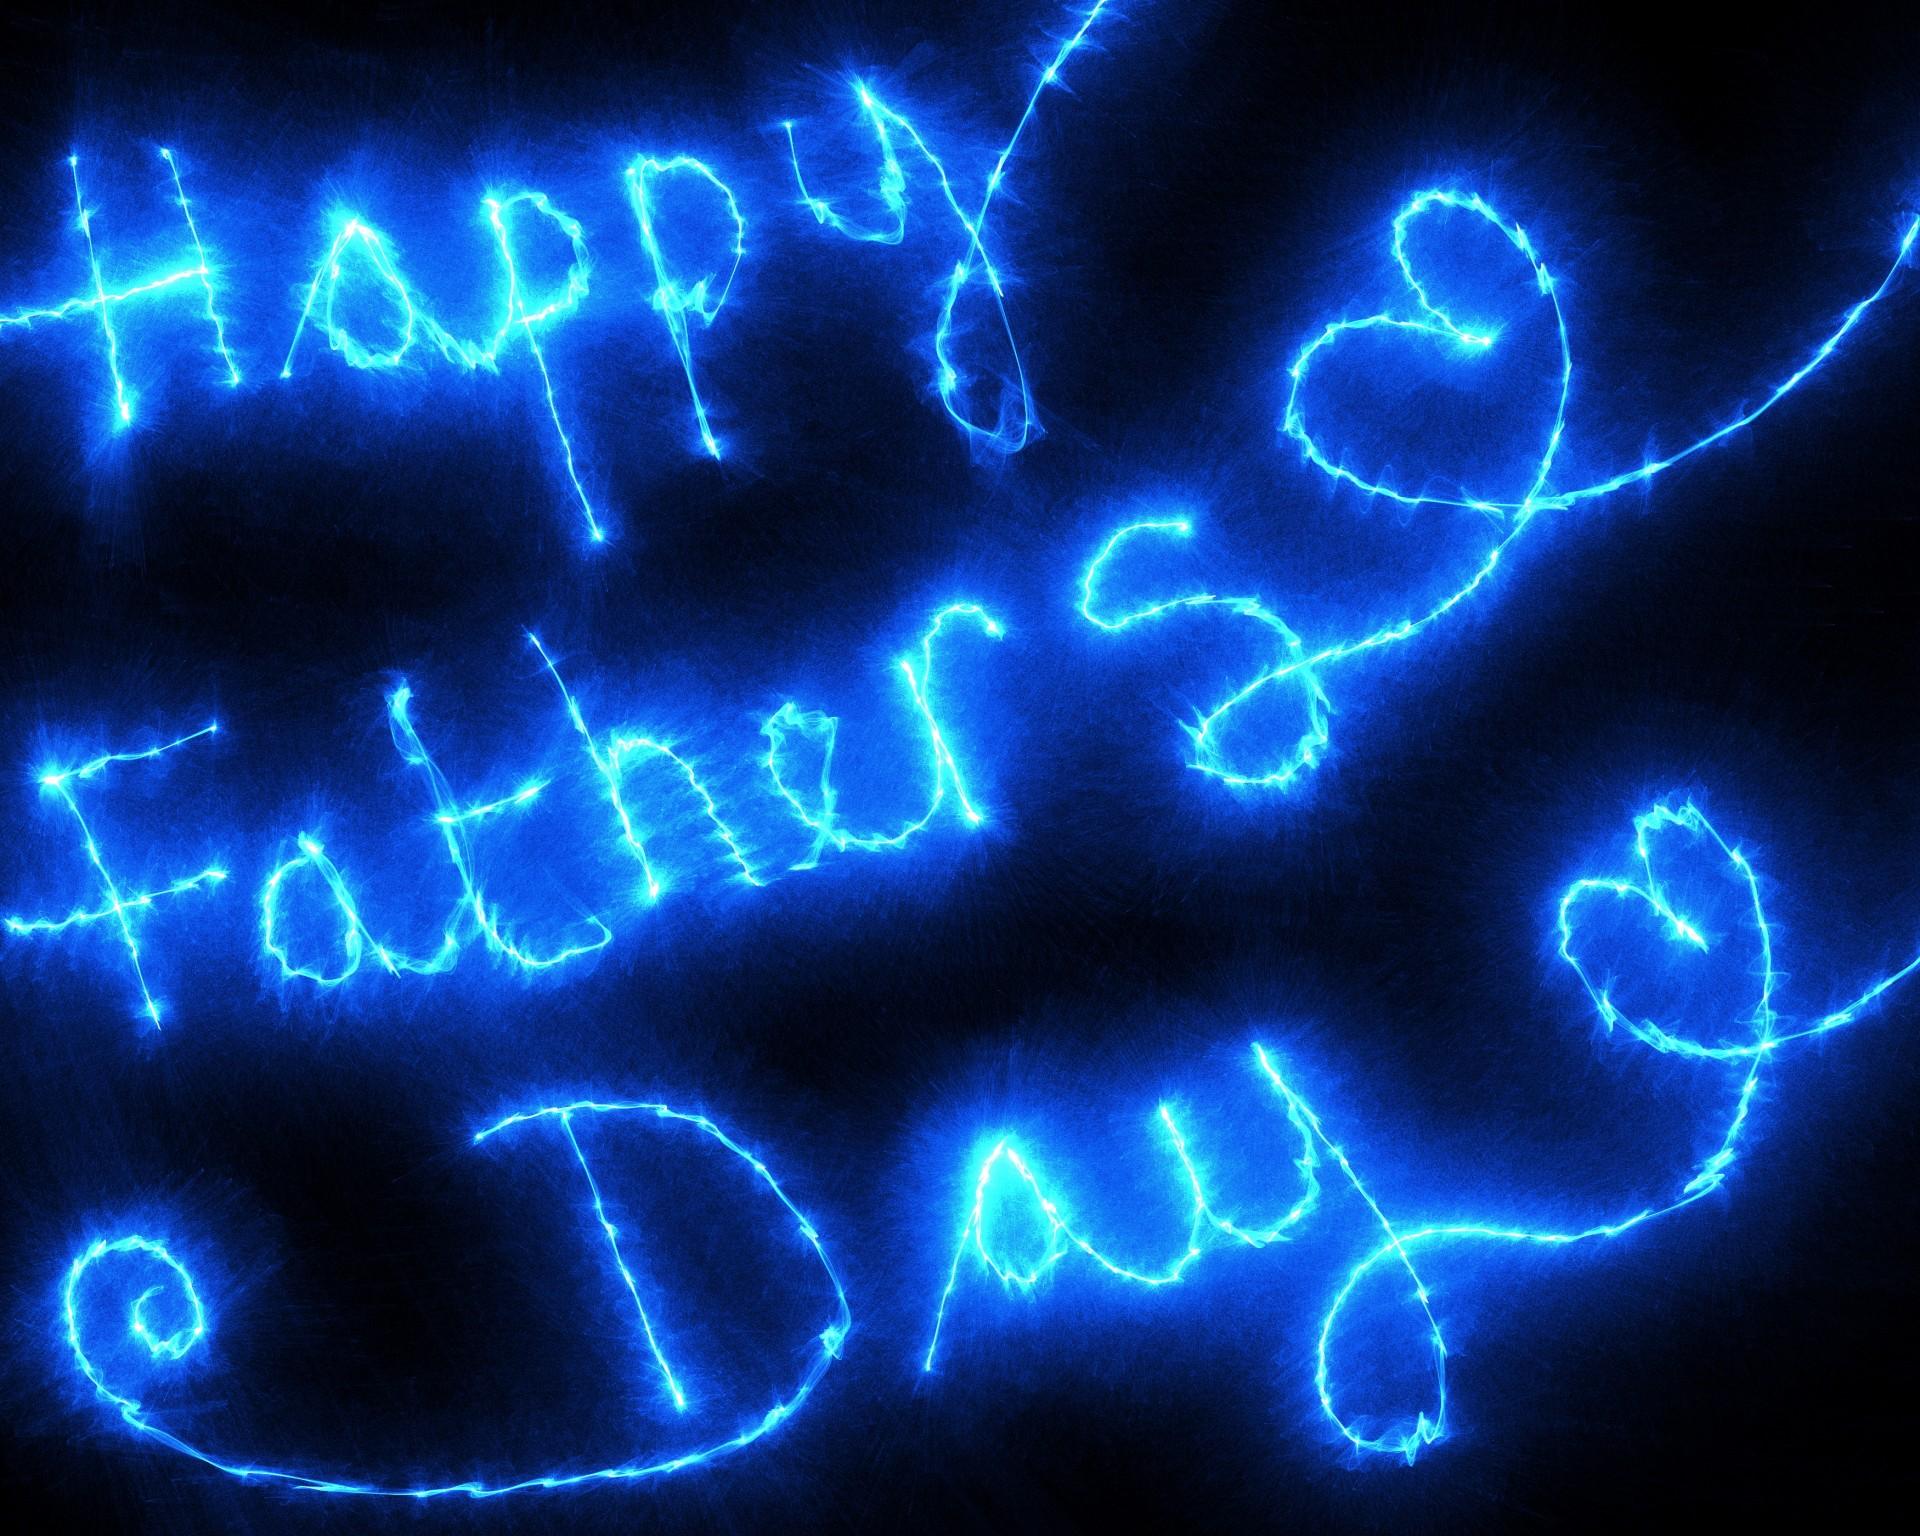 When Is Fathers Day Celebrations Fathers Day Image Quotes